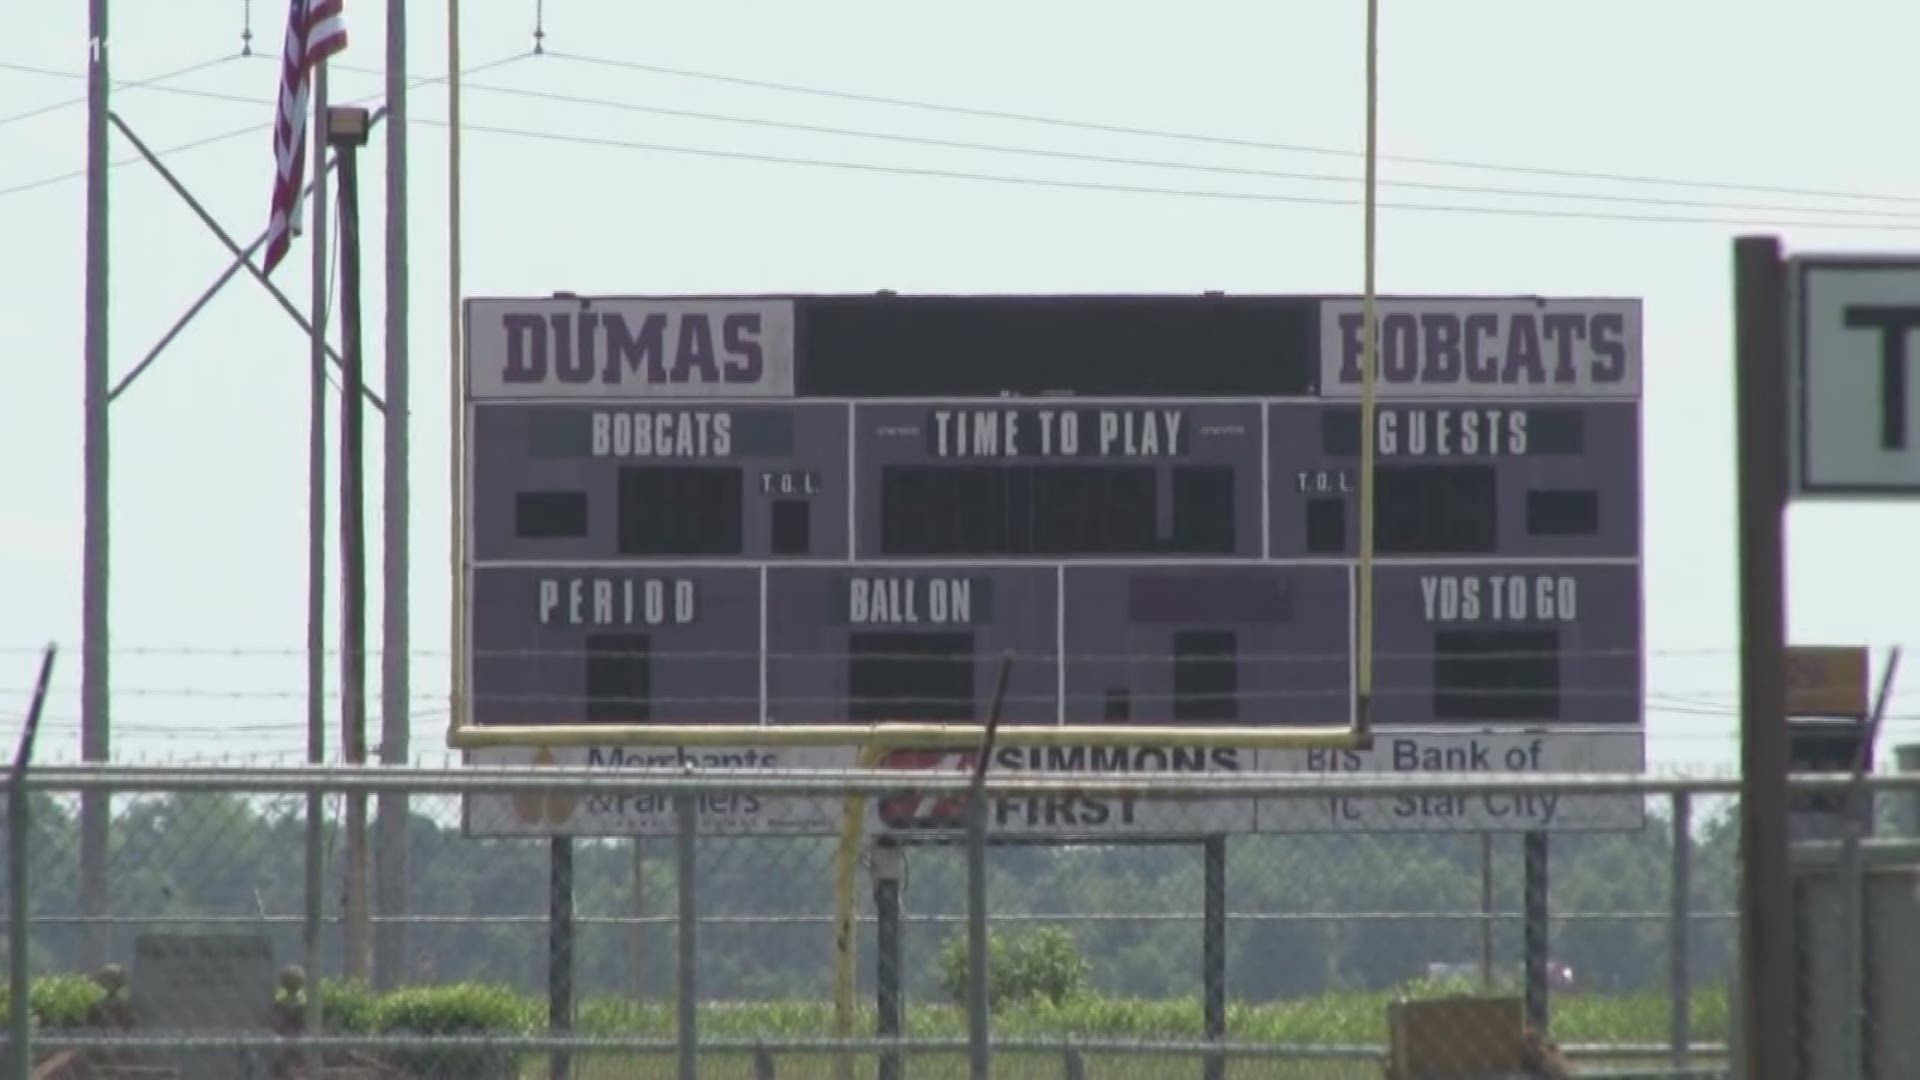 When you have questions, 11 listens. One of you asked about the Dumas coach who was suspended by the school board after sending a racist text message.